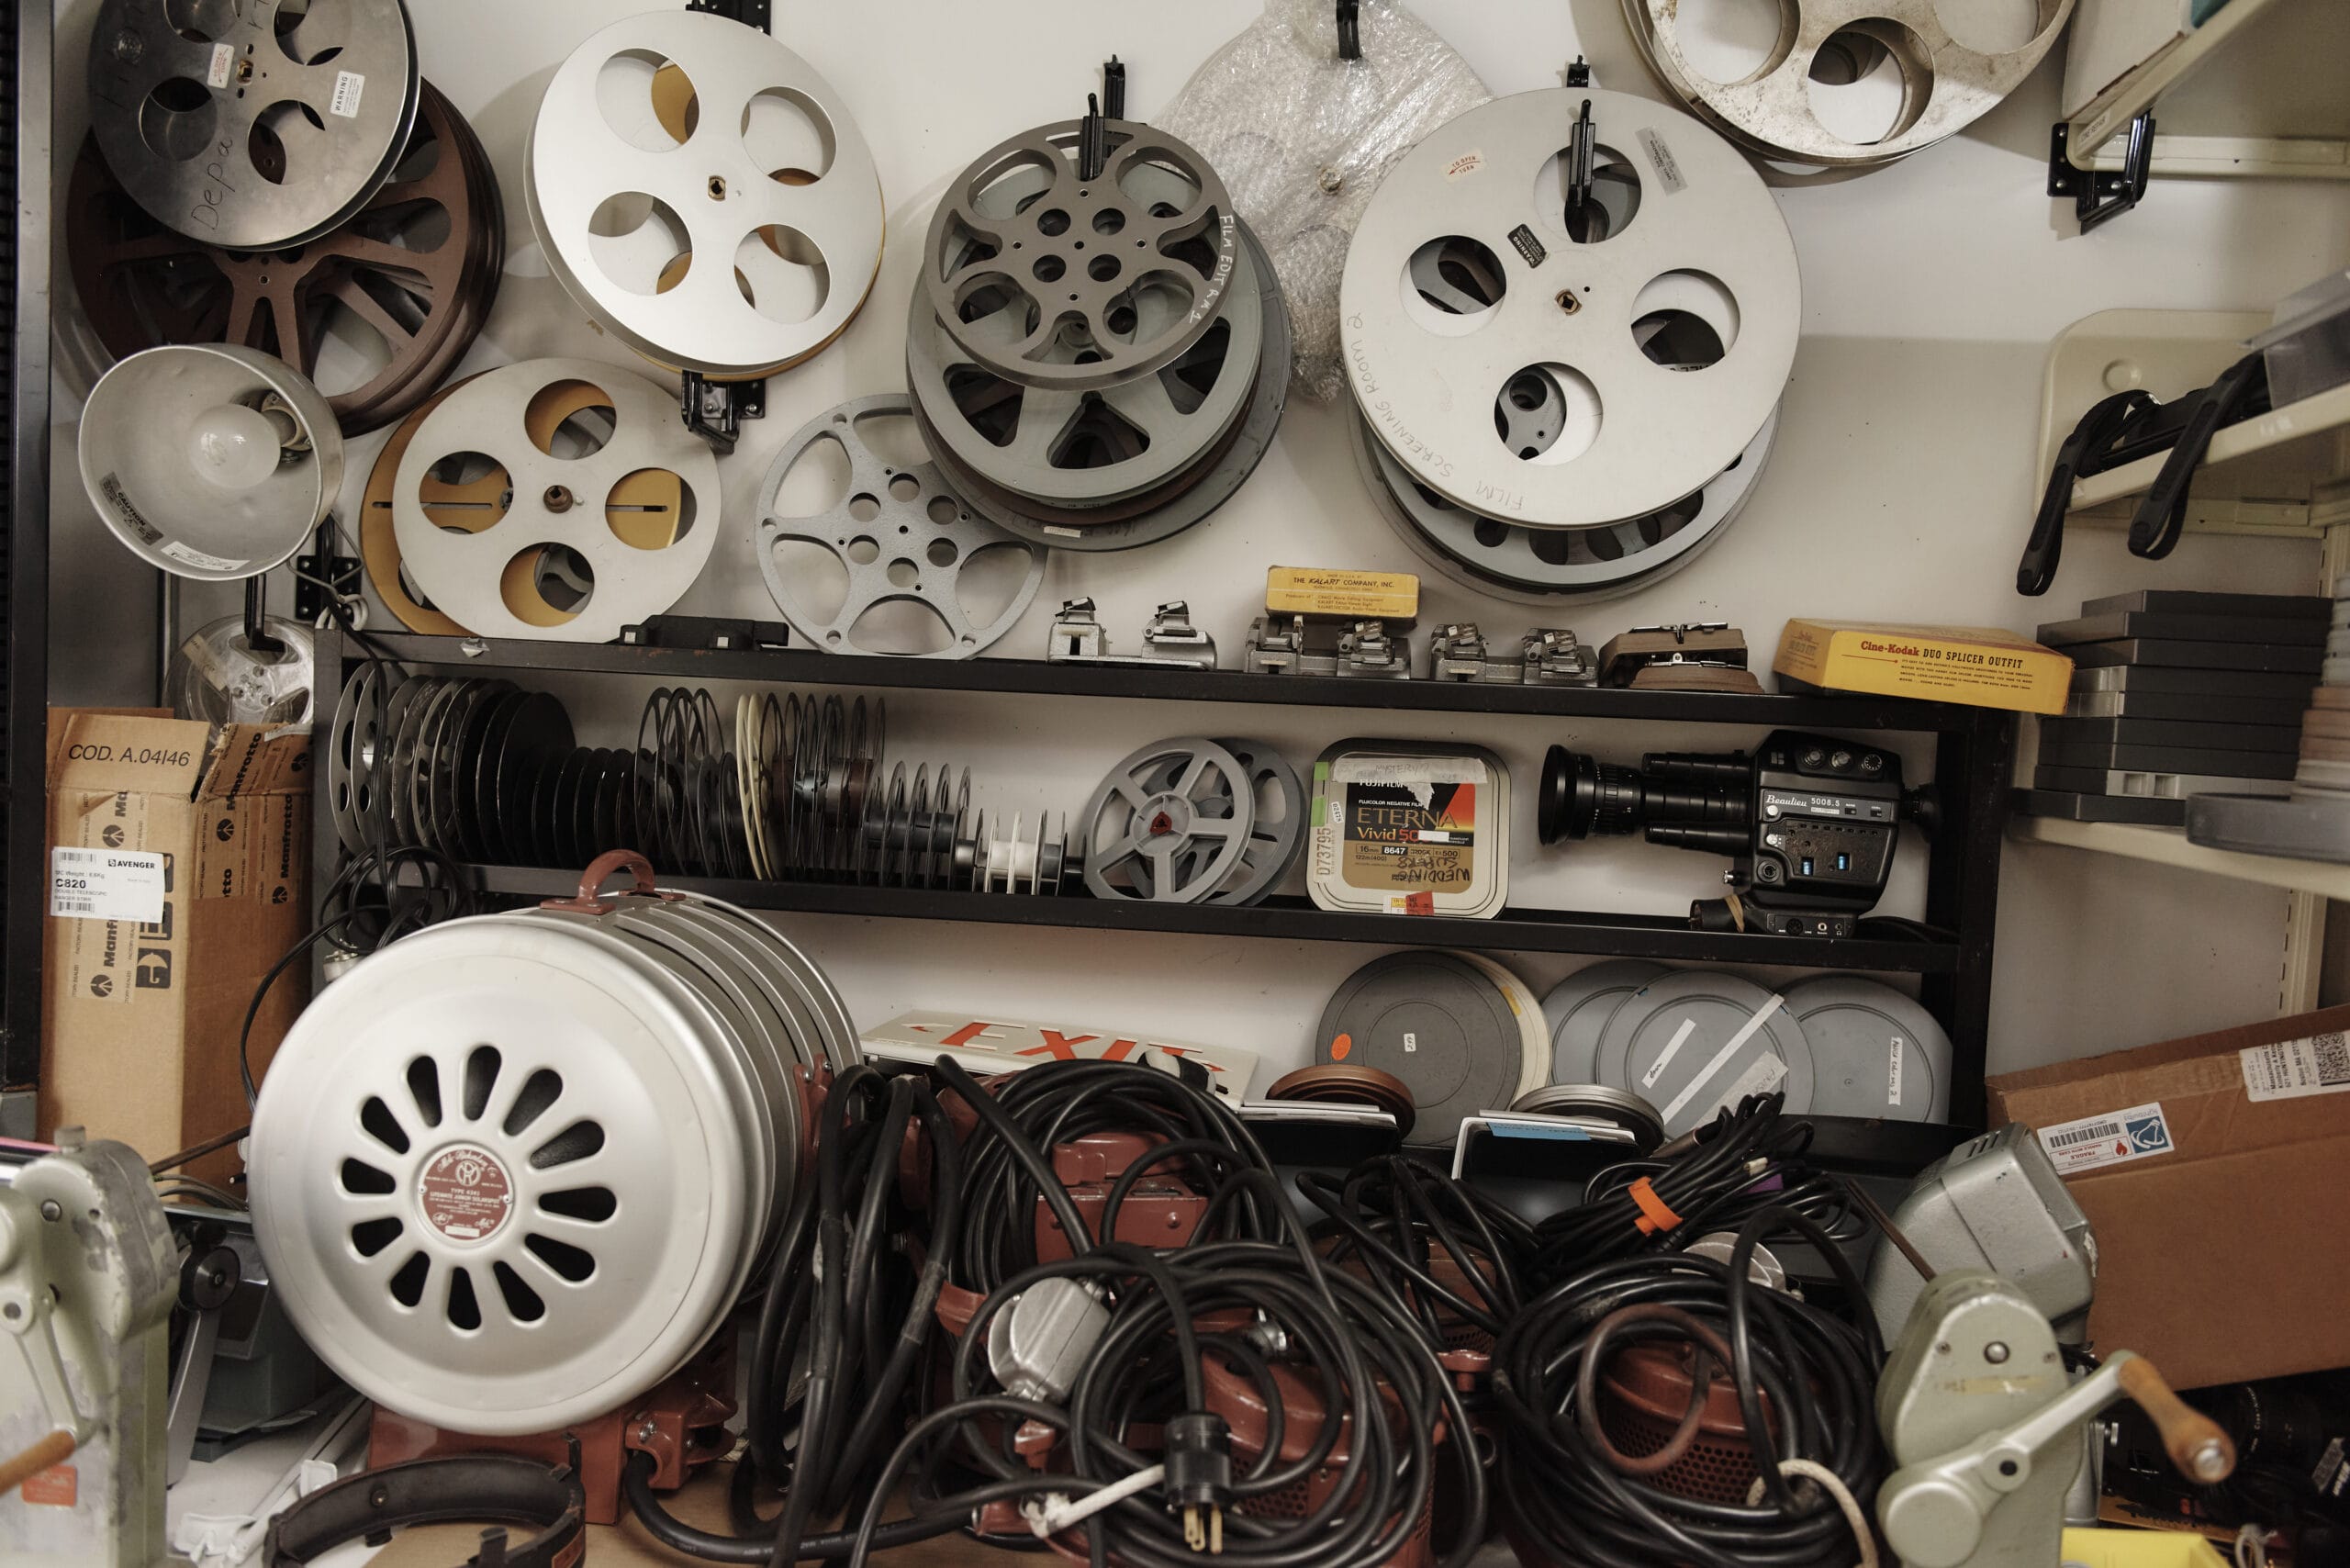 An equipment area with film spools hanging on the wall and cords wrapped up piled below.